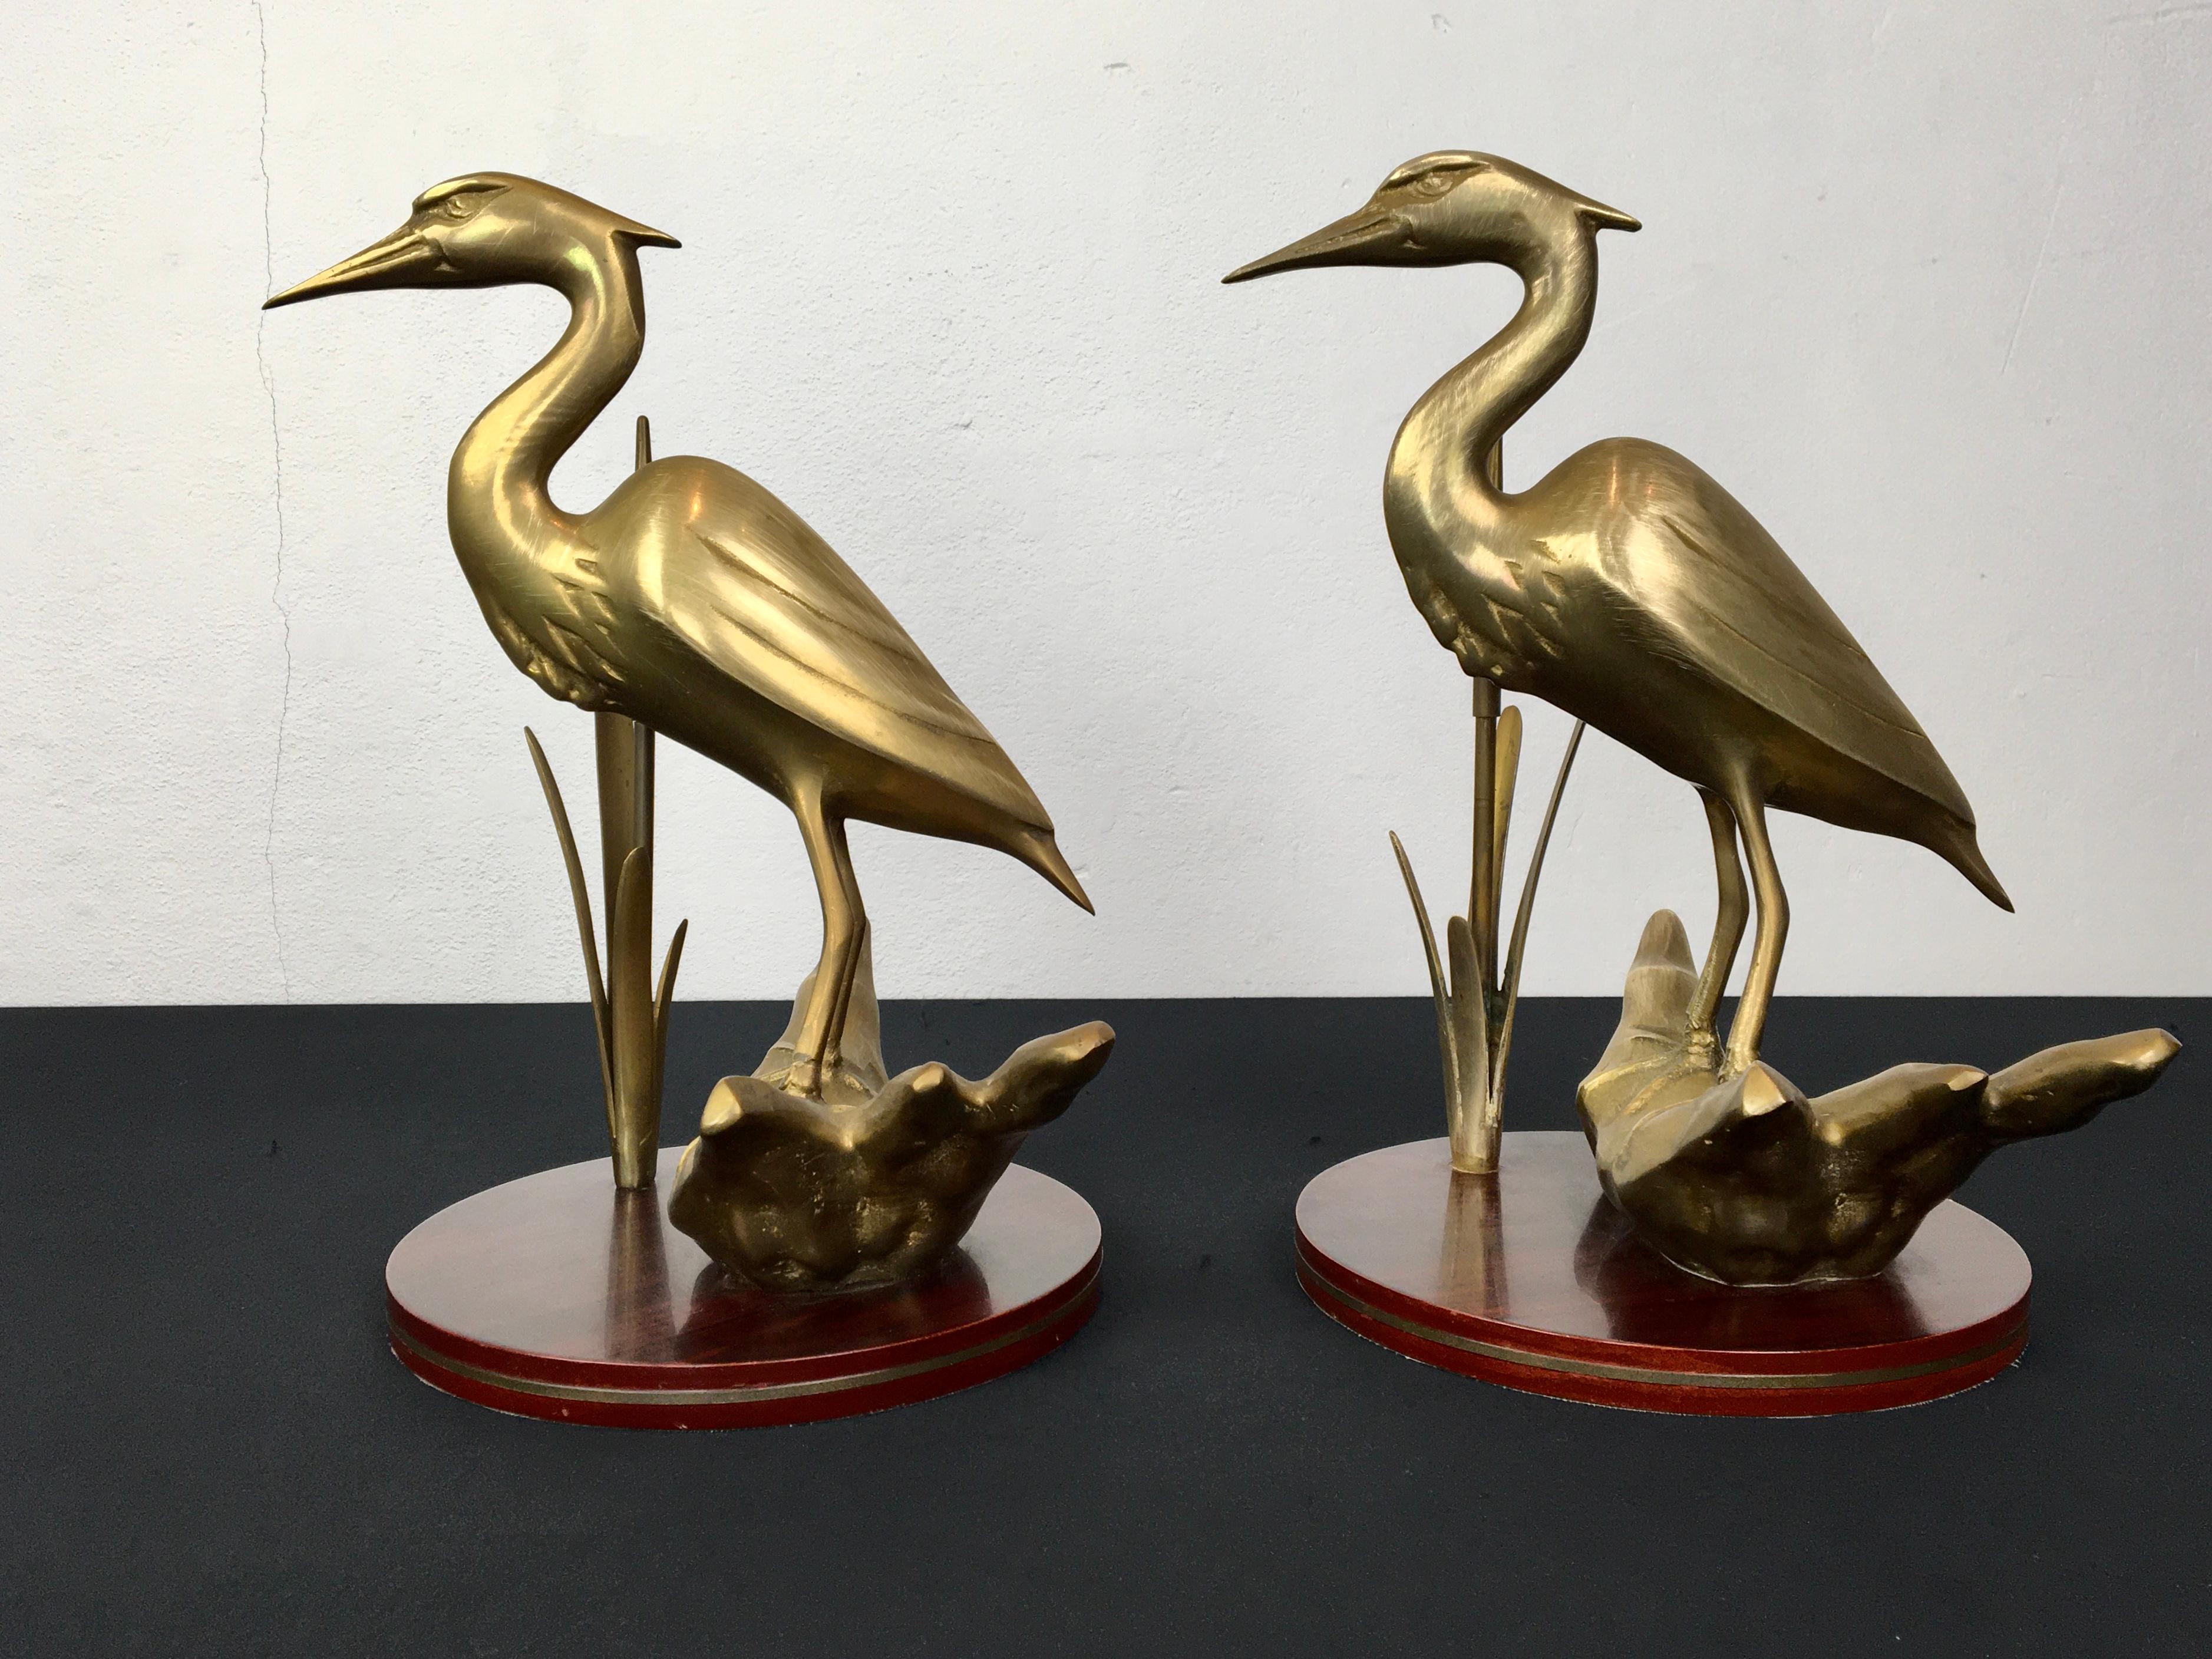 Pair of Brass Cranes Sculptures on Wood For Sale 13